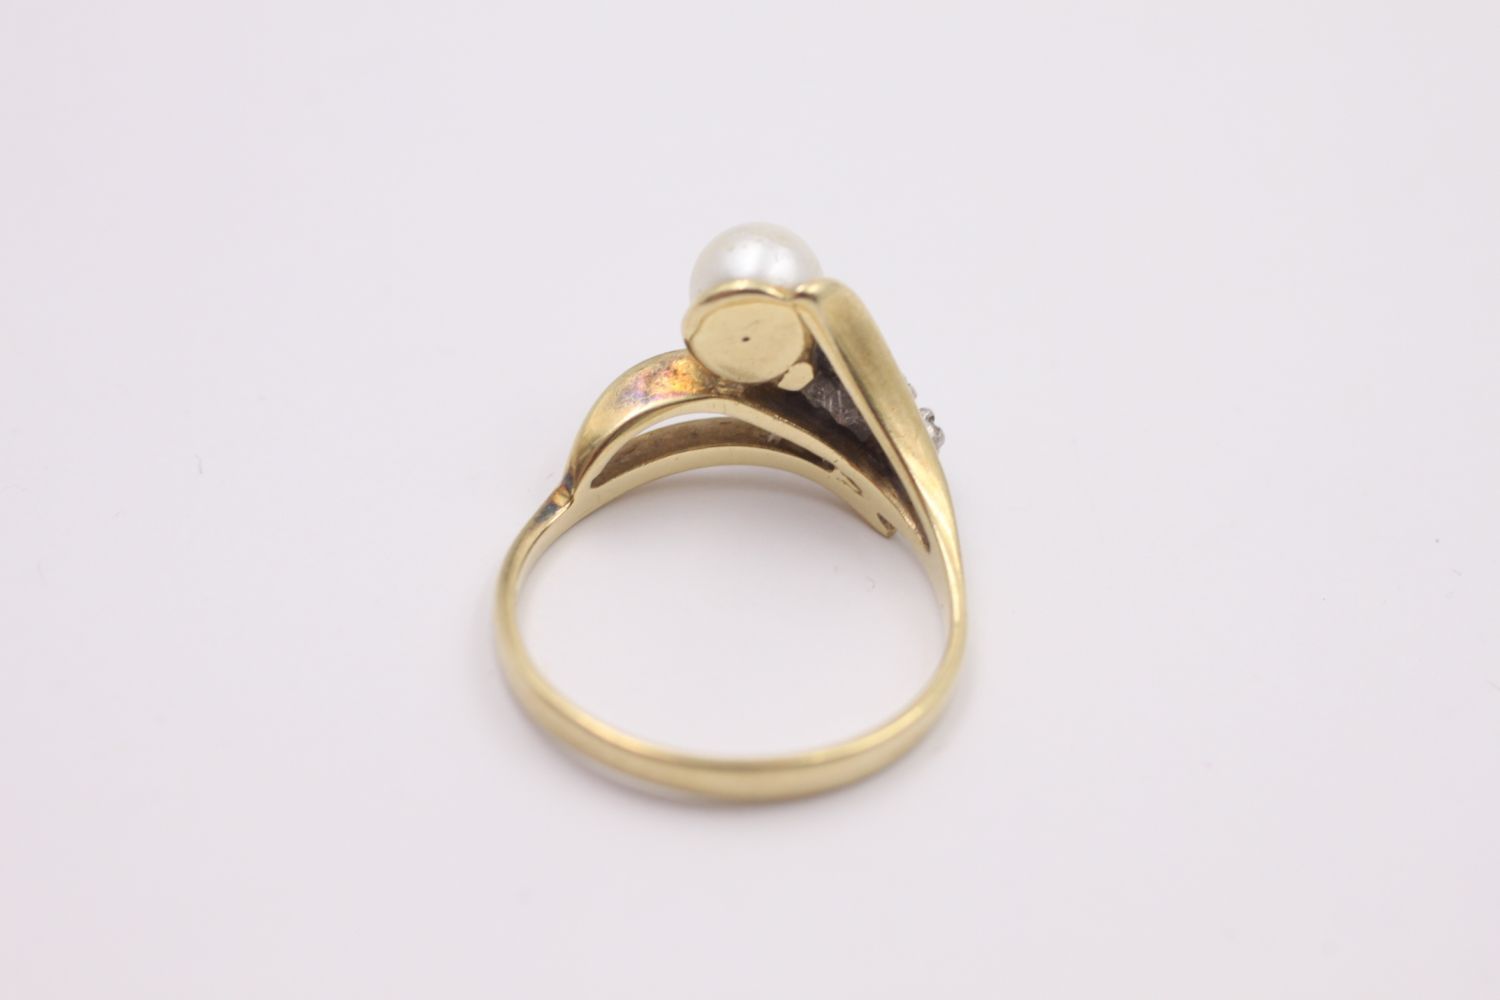 14ct gold diamond & pearl bypass ring, missing stone 3.4 grams gross - Image 5 of 5